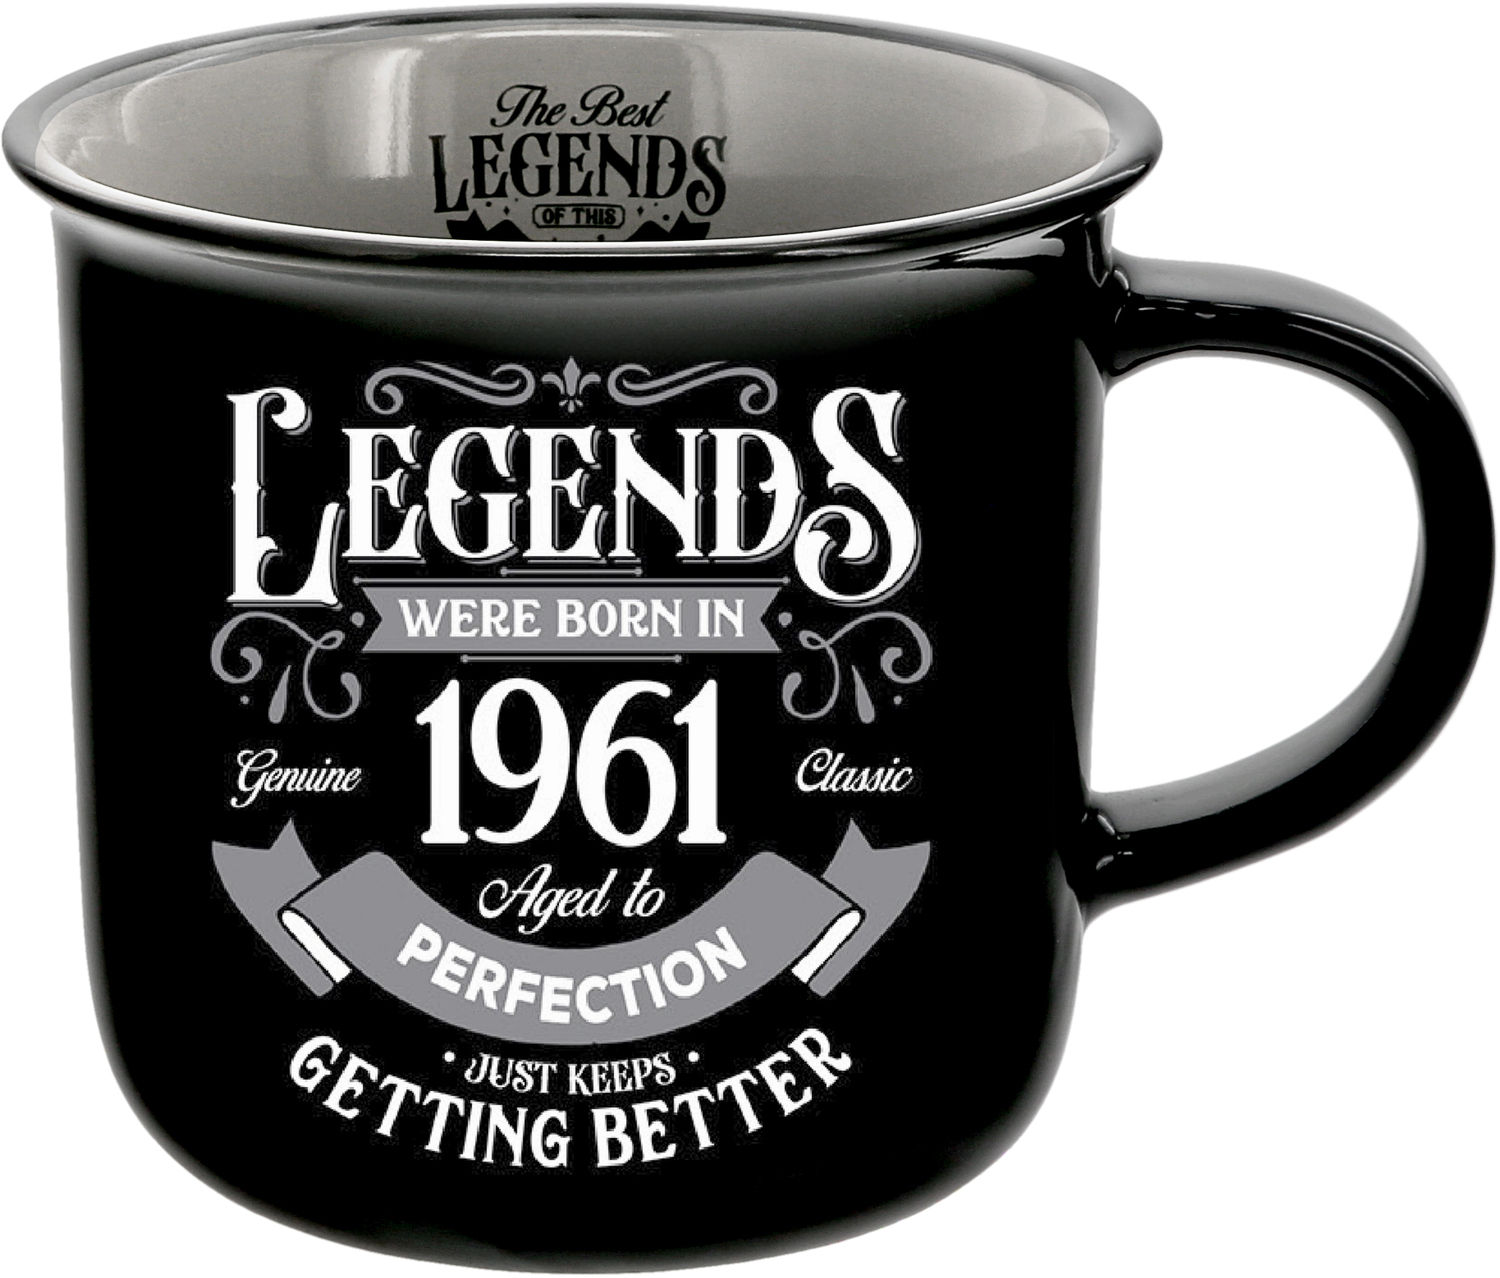 1961 by Legends of this World - 1961 - 13 oz Mug